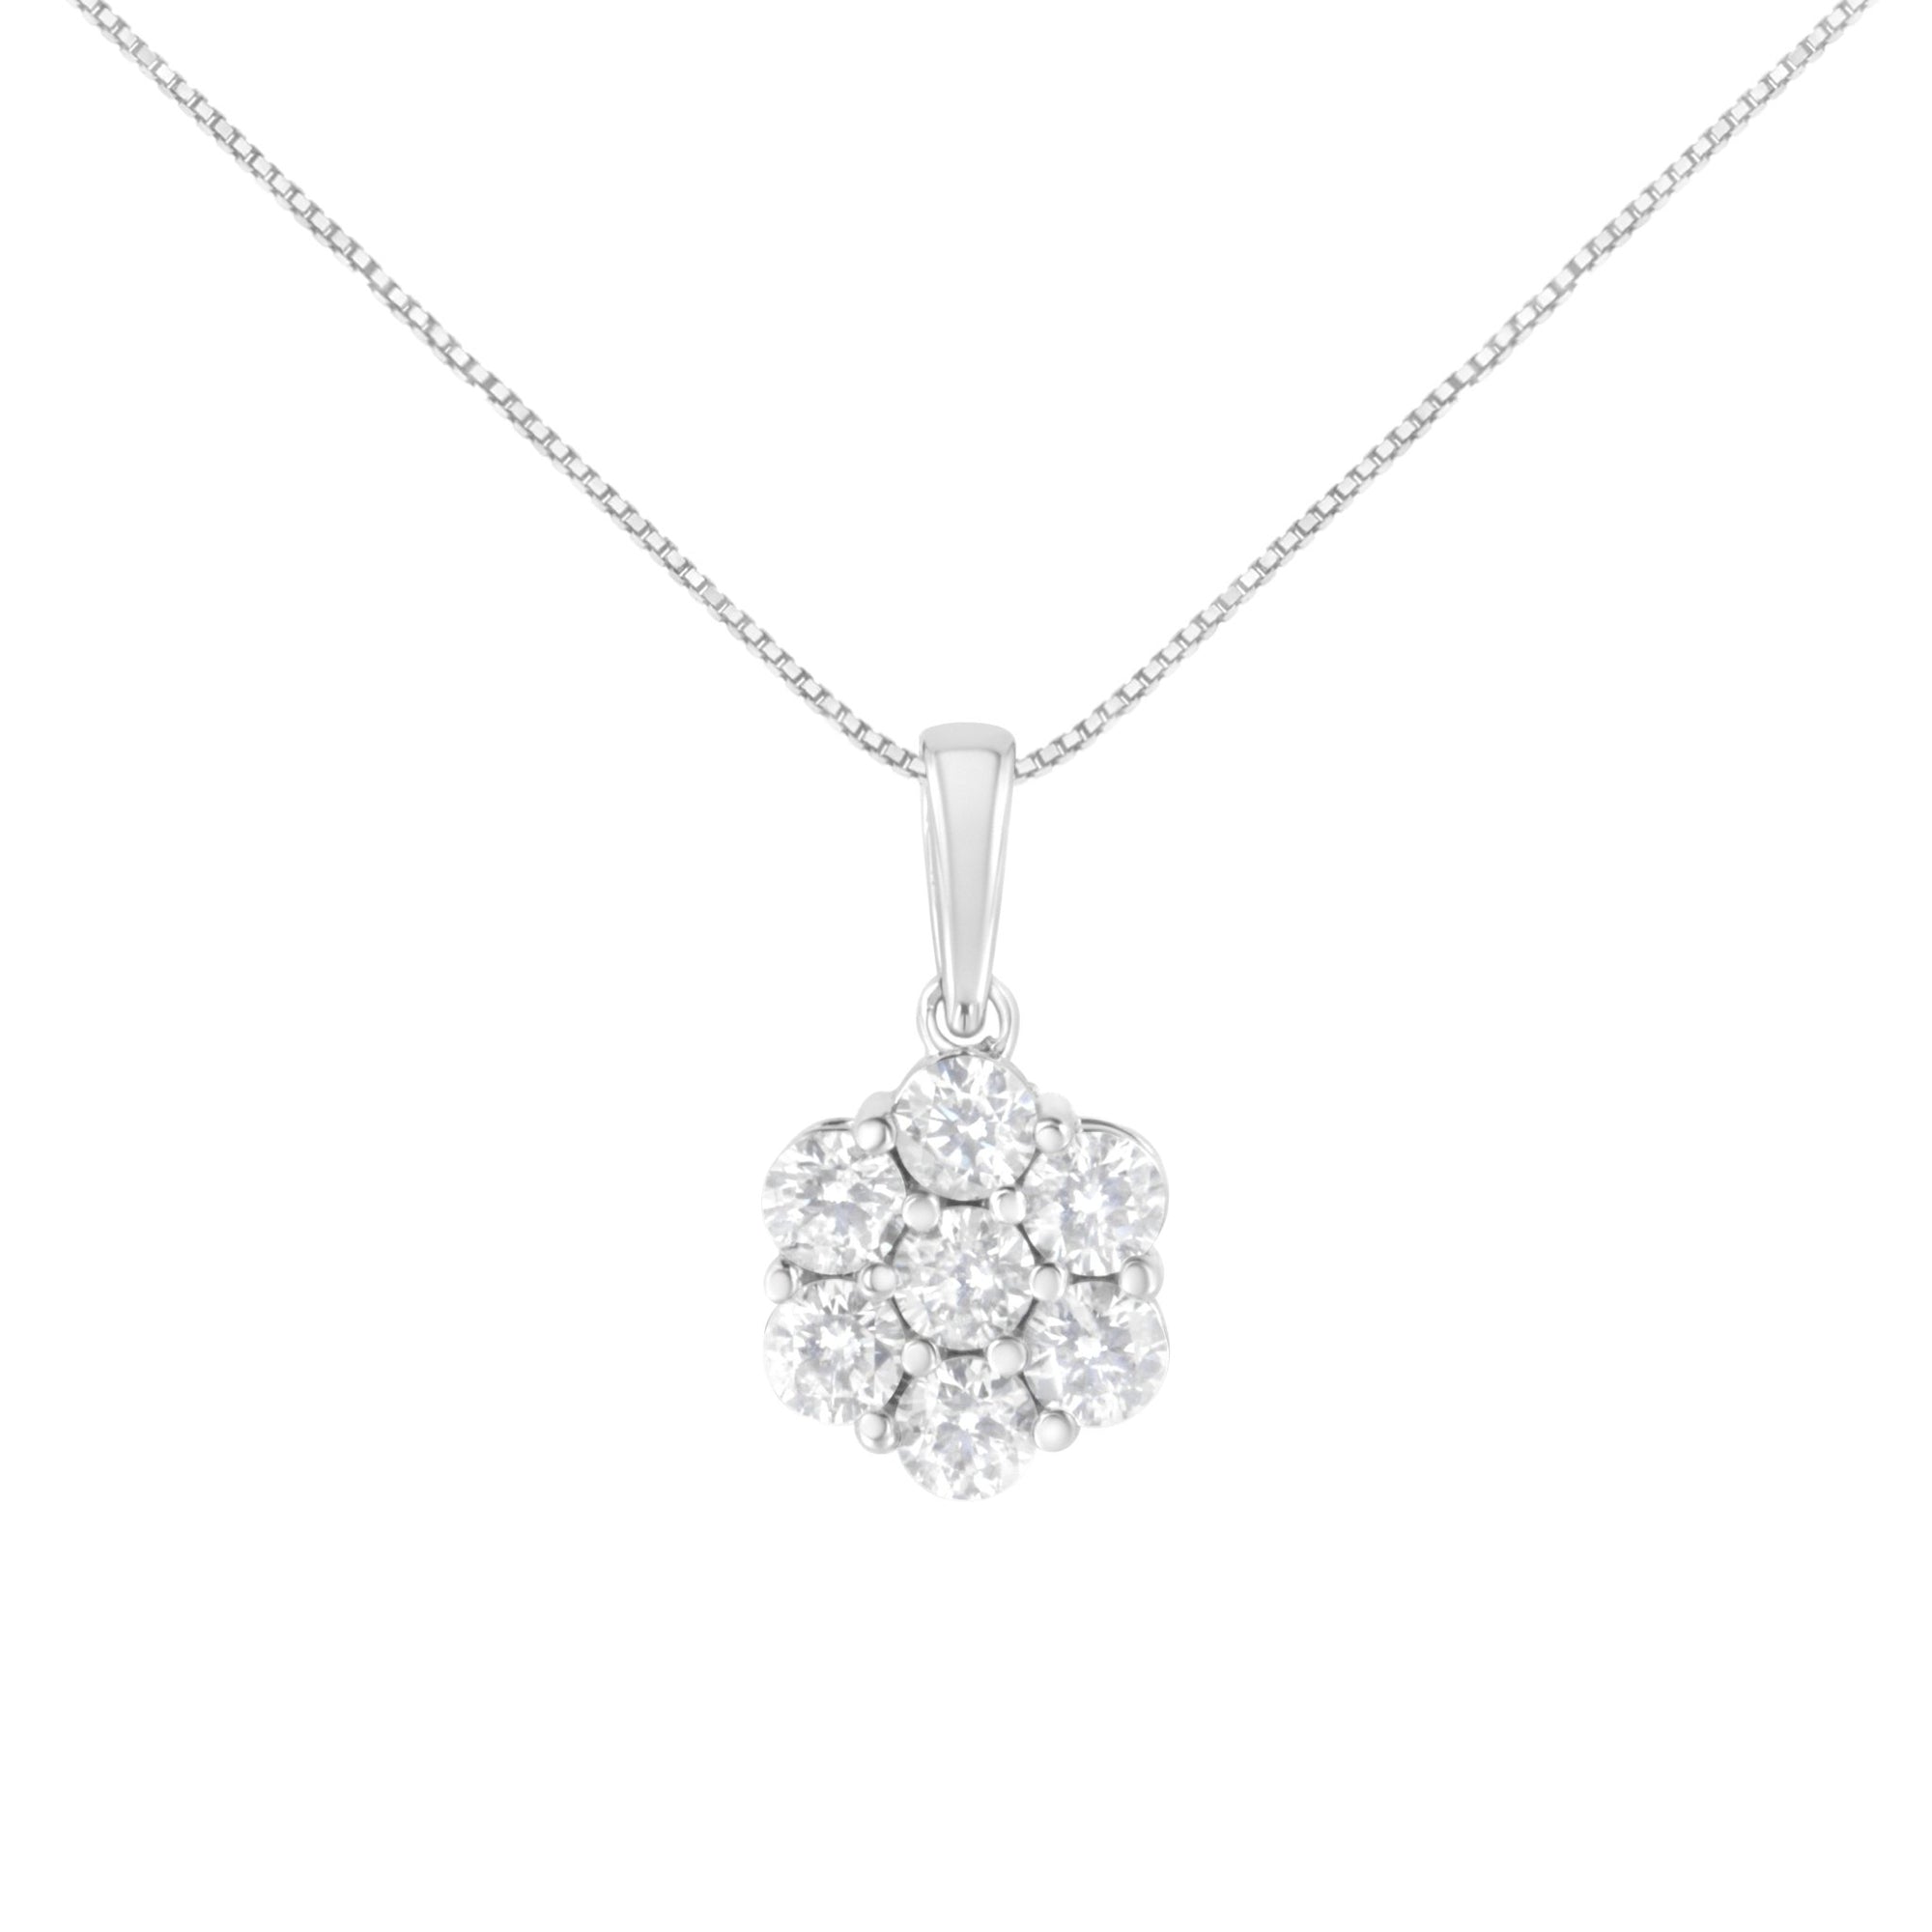 14K White Gold 2.00 Cttw Brilliant Round-Cut Diamond 7 Stone Flower Cluster 18" Pendant Necklace (H-I Color, SI2-I1 Clarity) - LinkagejewelrydesignLinkagejewelrydesign